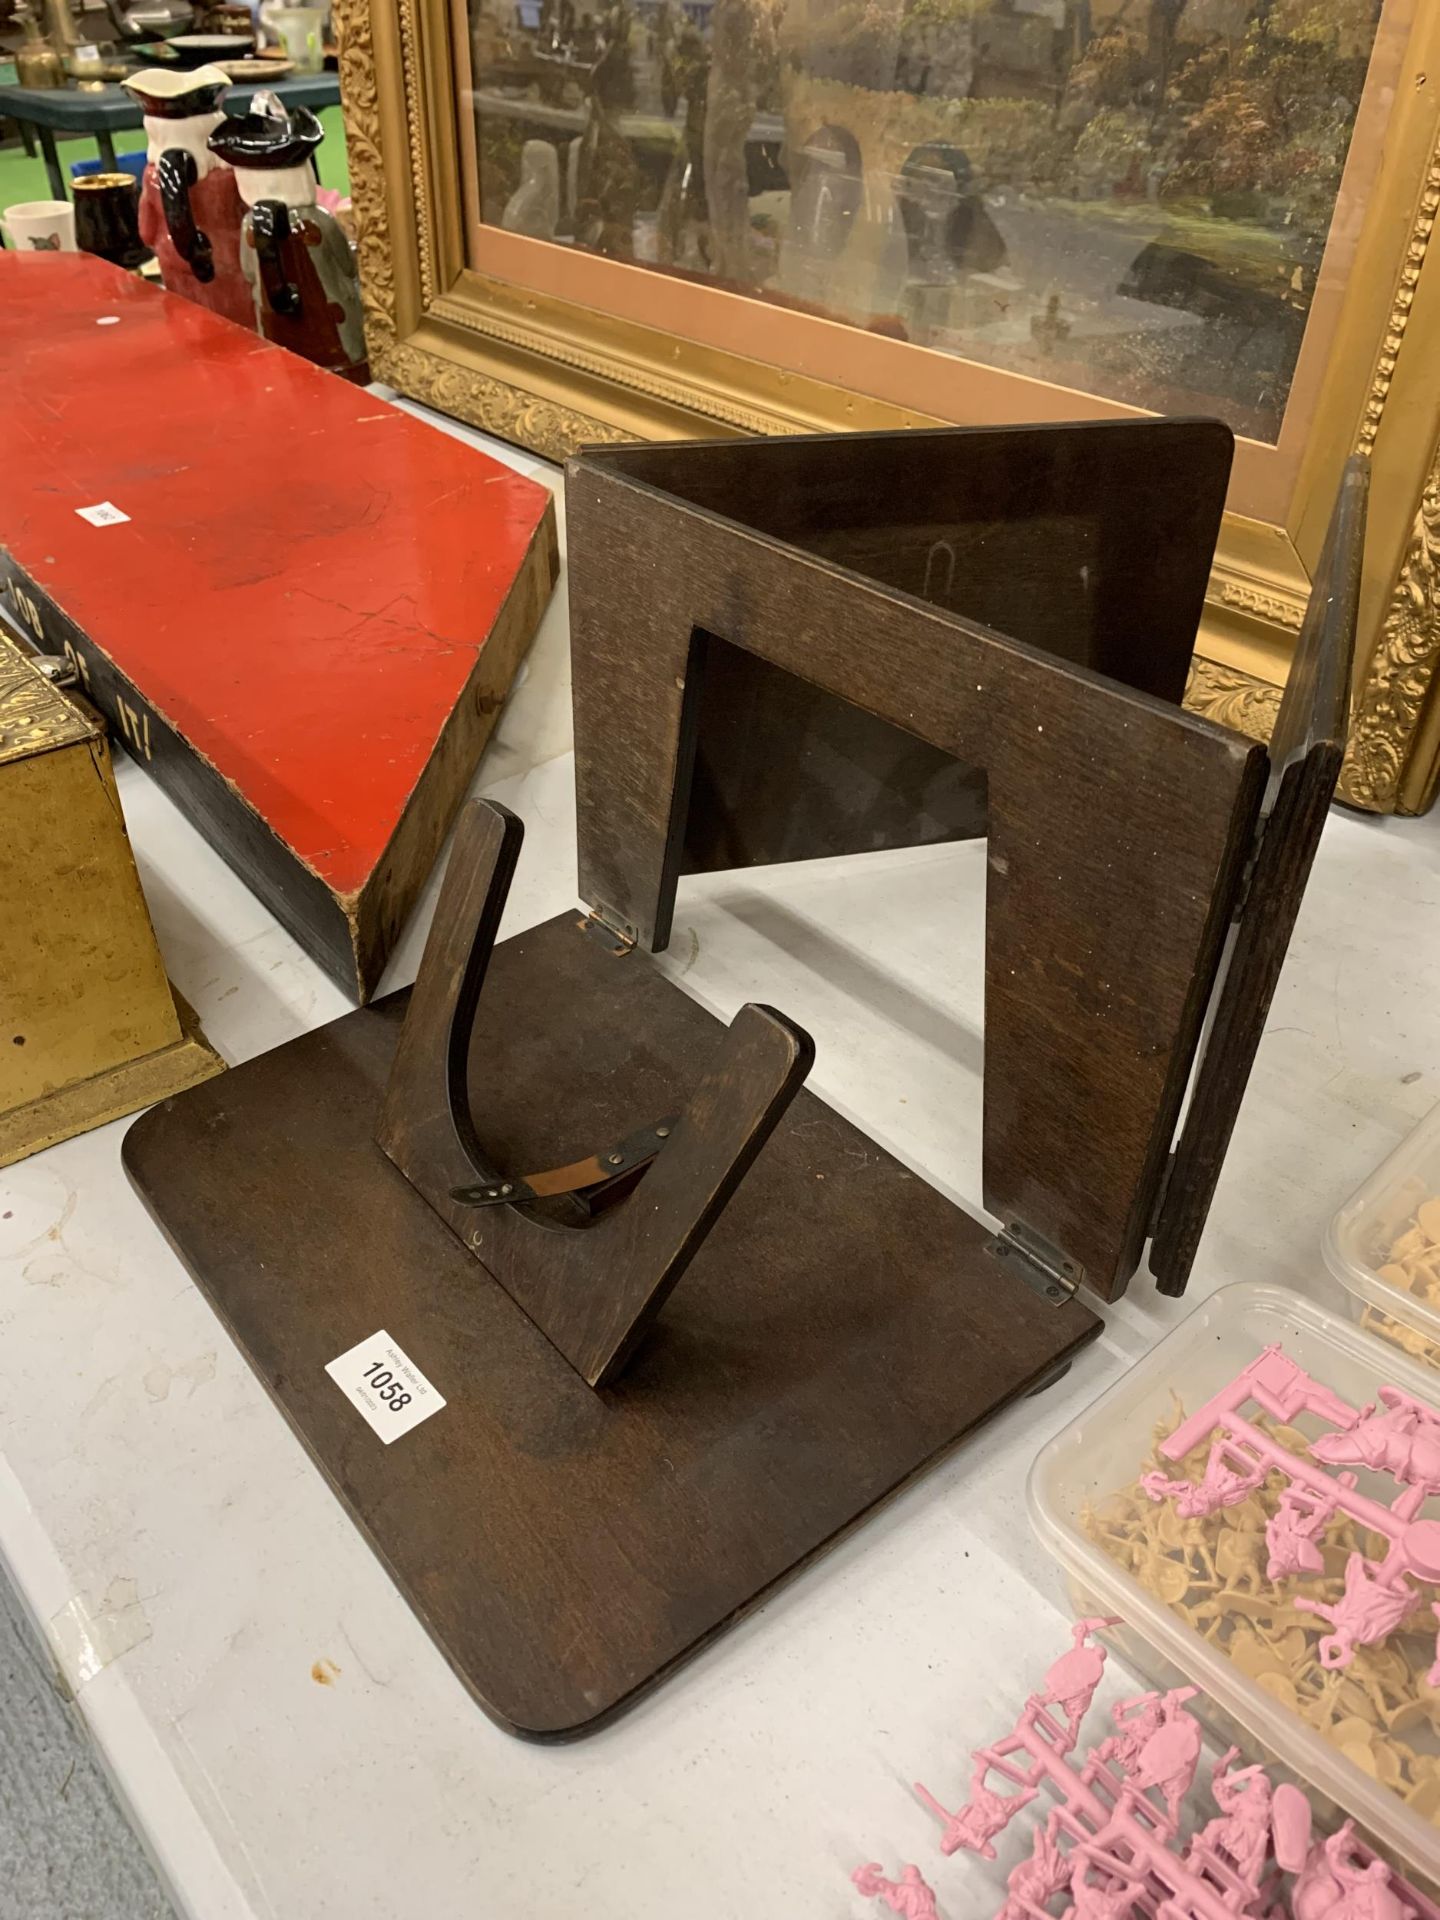 A VINTAGE MAHOGANY SLIDE VIEWER STAND - Image 2 of 2